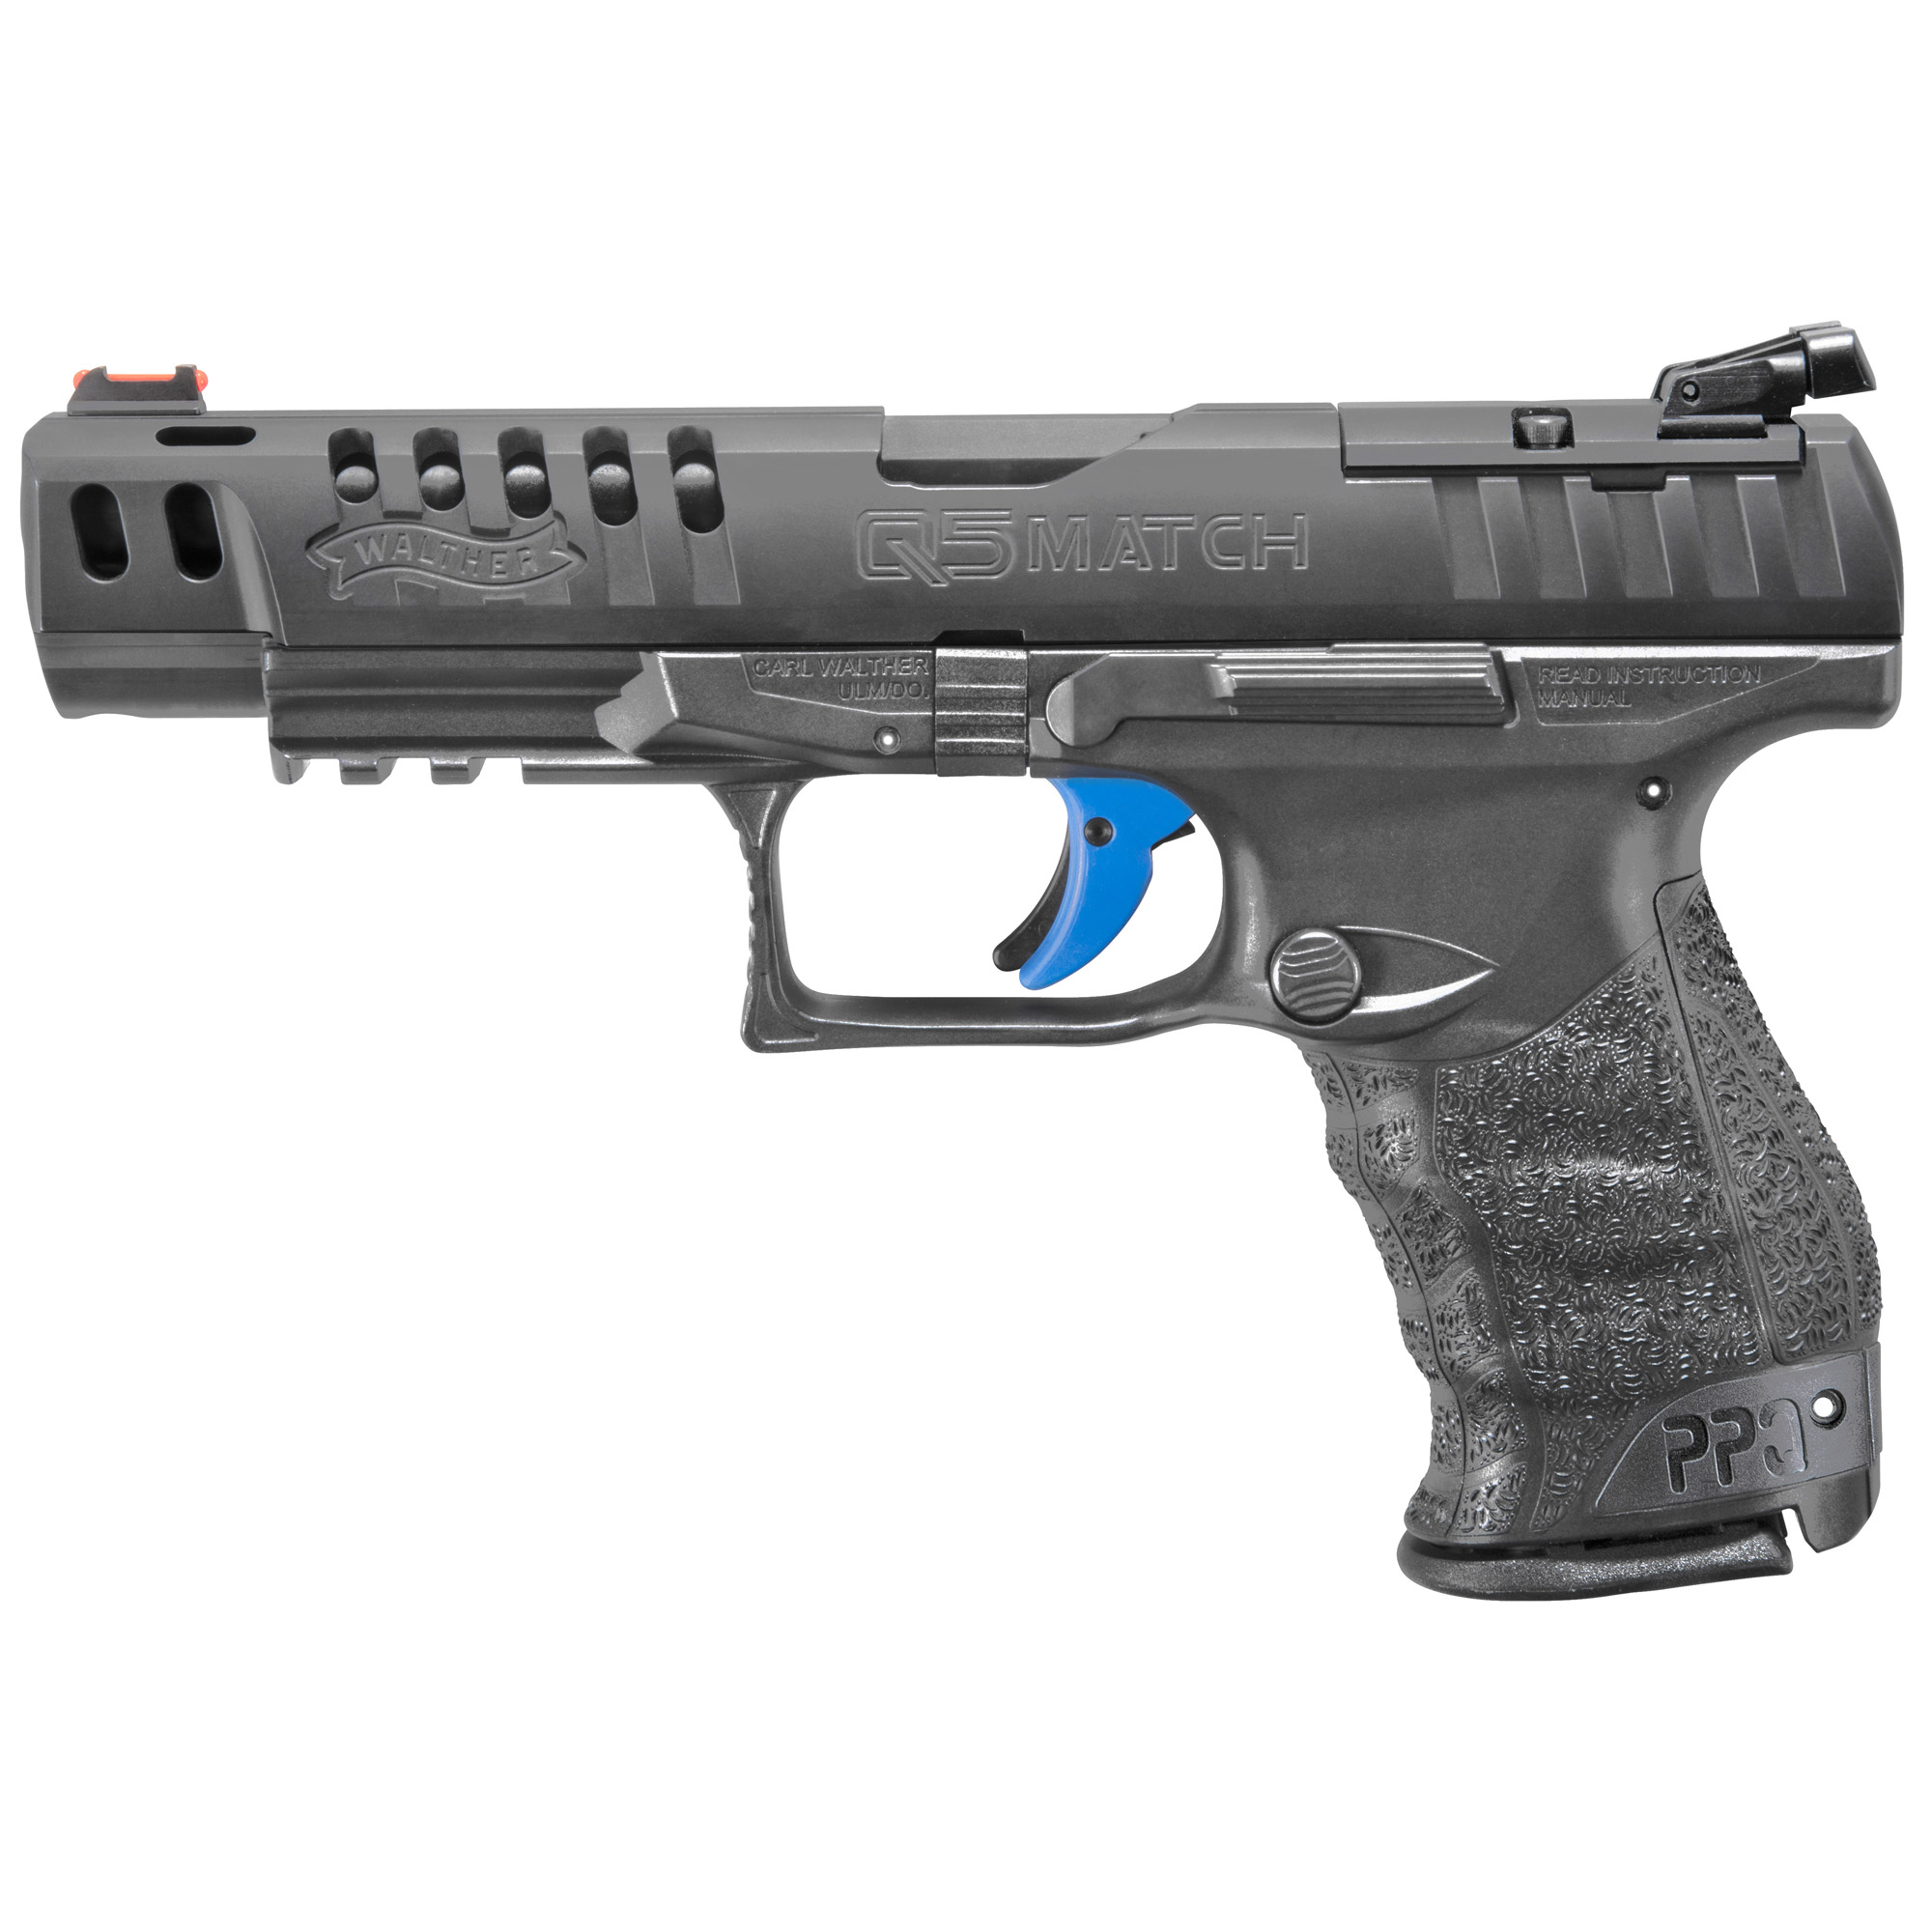 WALTHER Q5 MATCH 9MM 5 10RD BLK